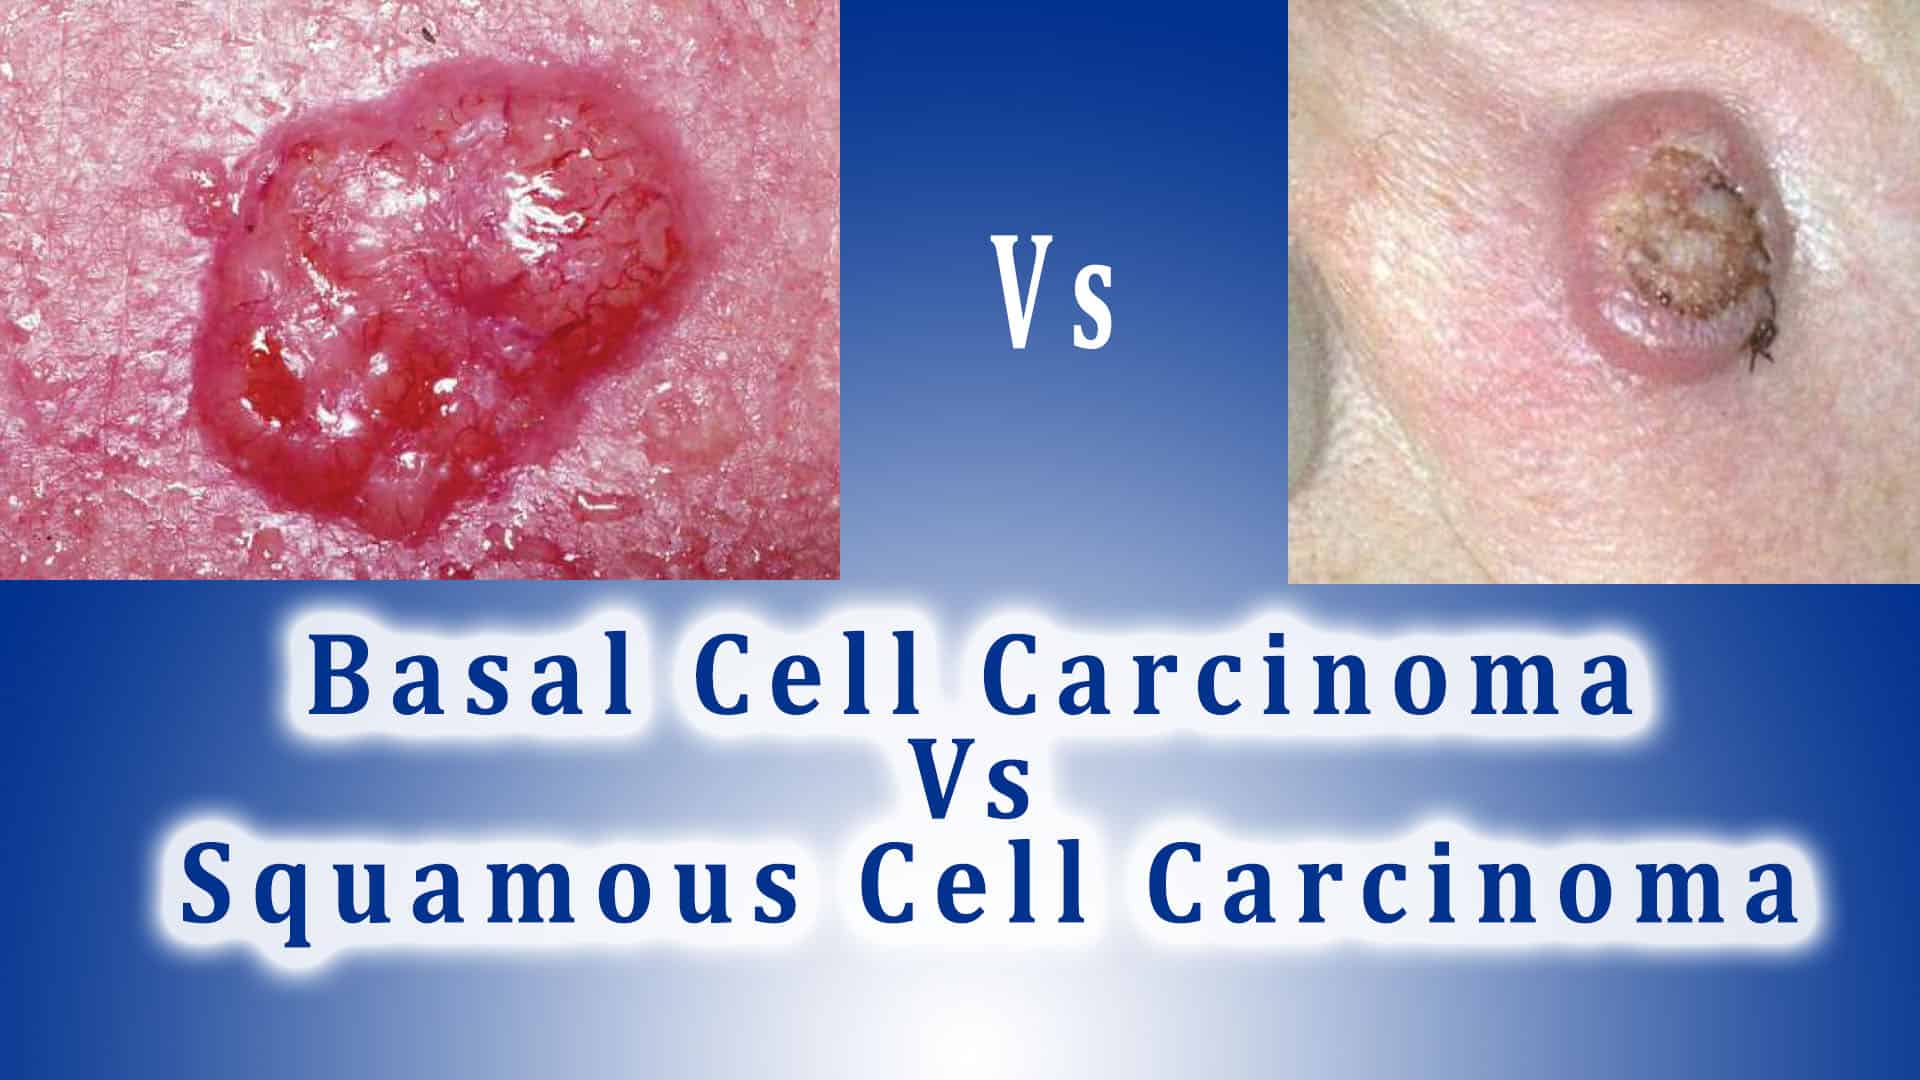 Basal Cell Carcinoma Vs Squamous Cell Carcinoma (BCC Vs SCC)